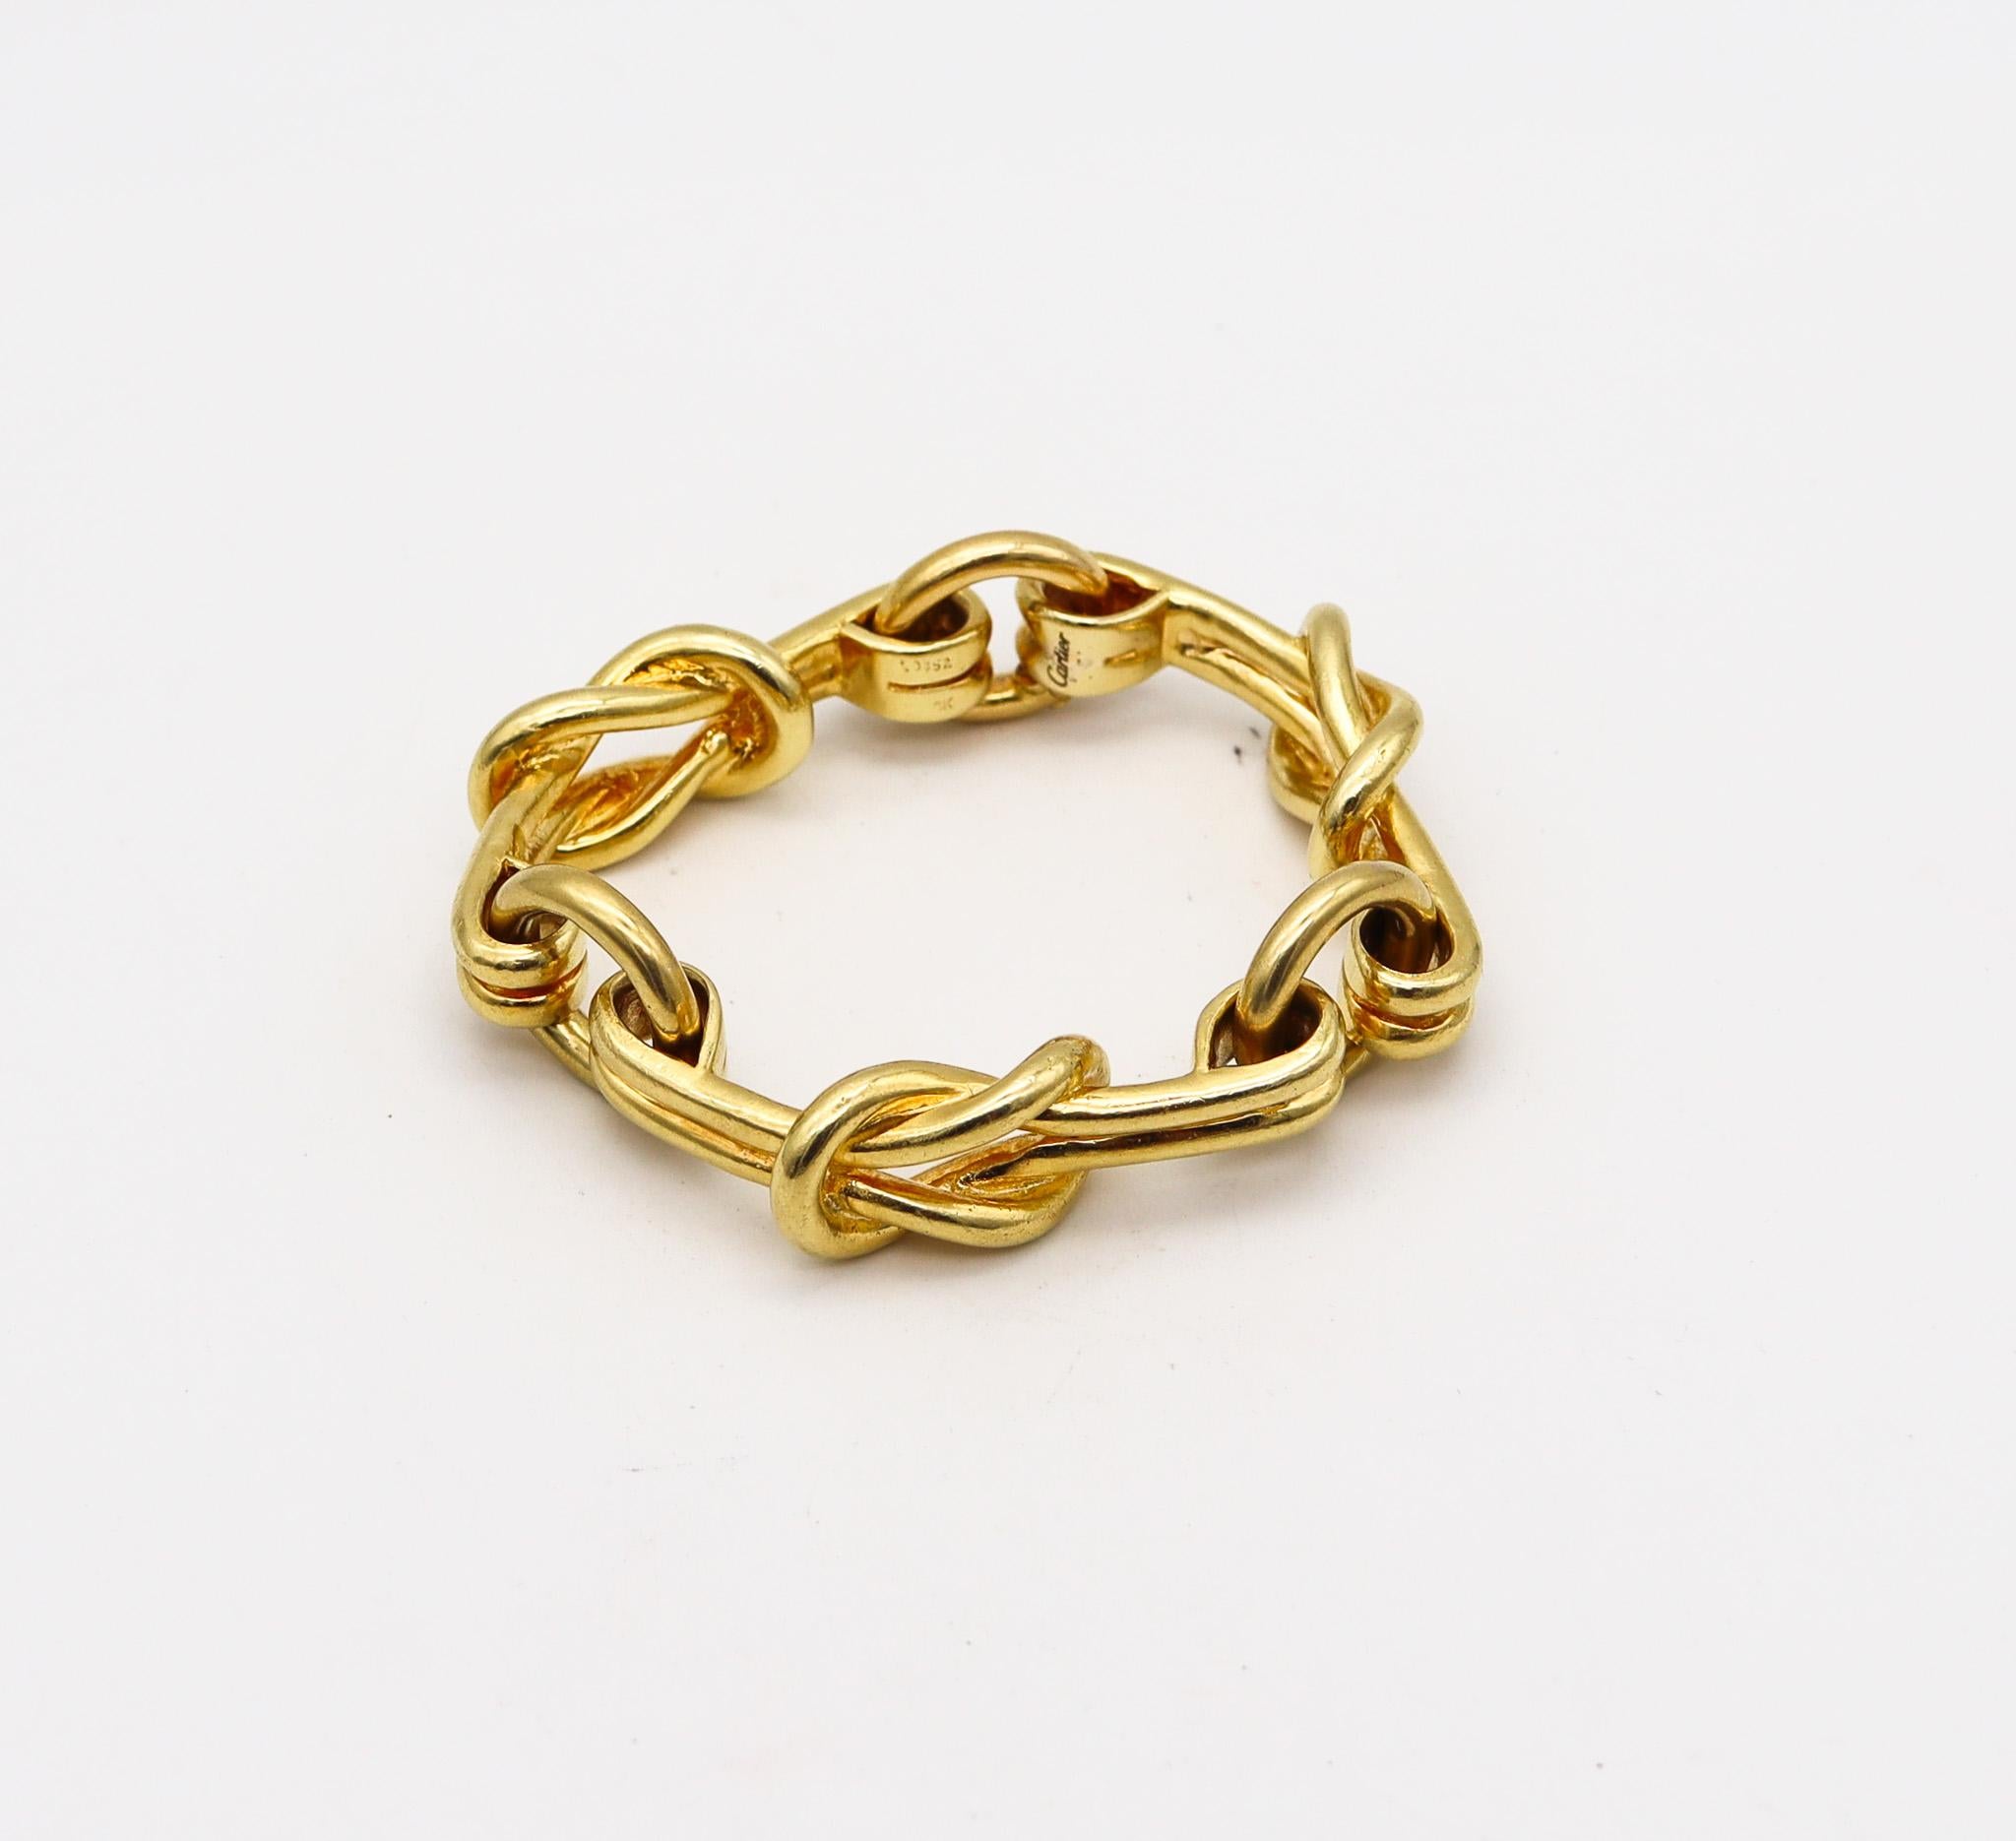 Cartier 1970 Hercules Knots Statement Links Bracelet In Solid 18Kt Yellow Gold In Excellent Condition For Sale In Miami, FL